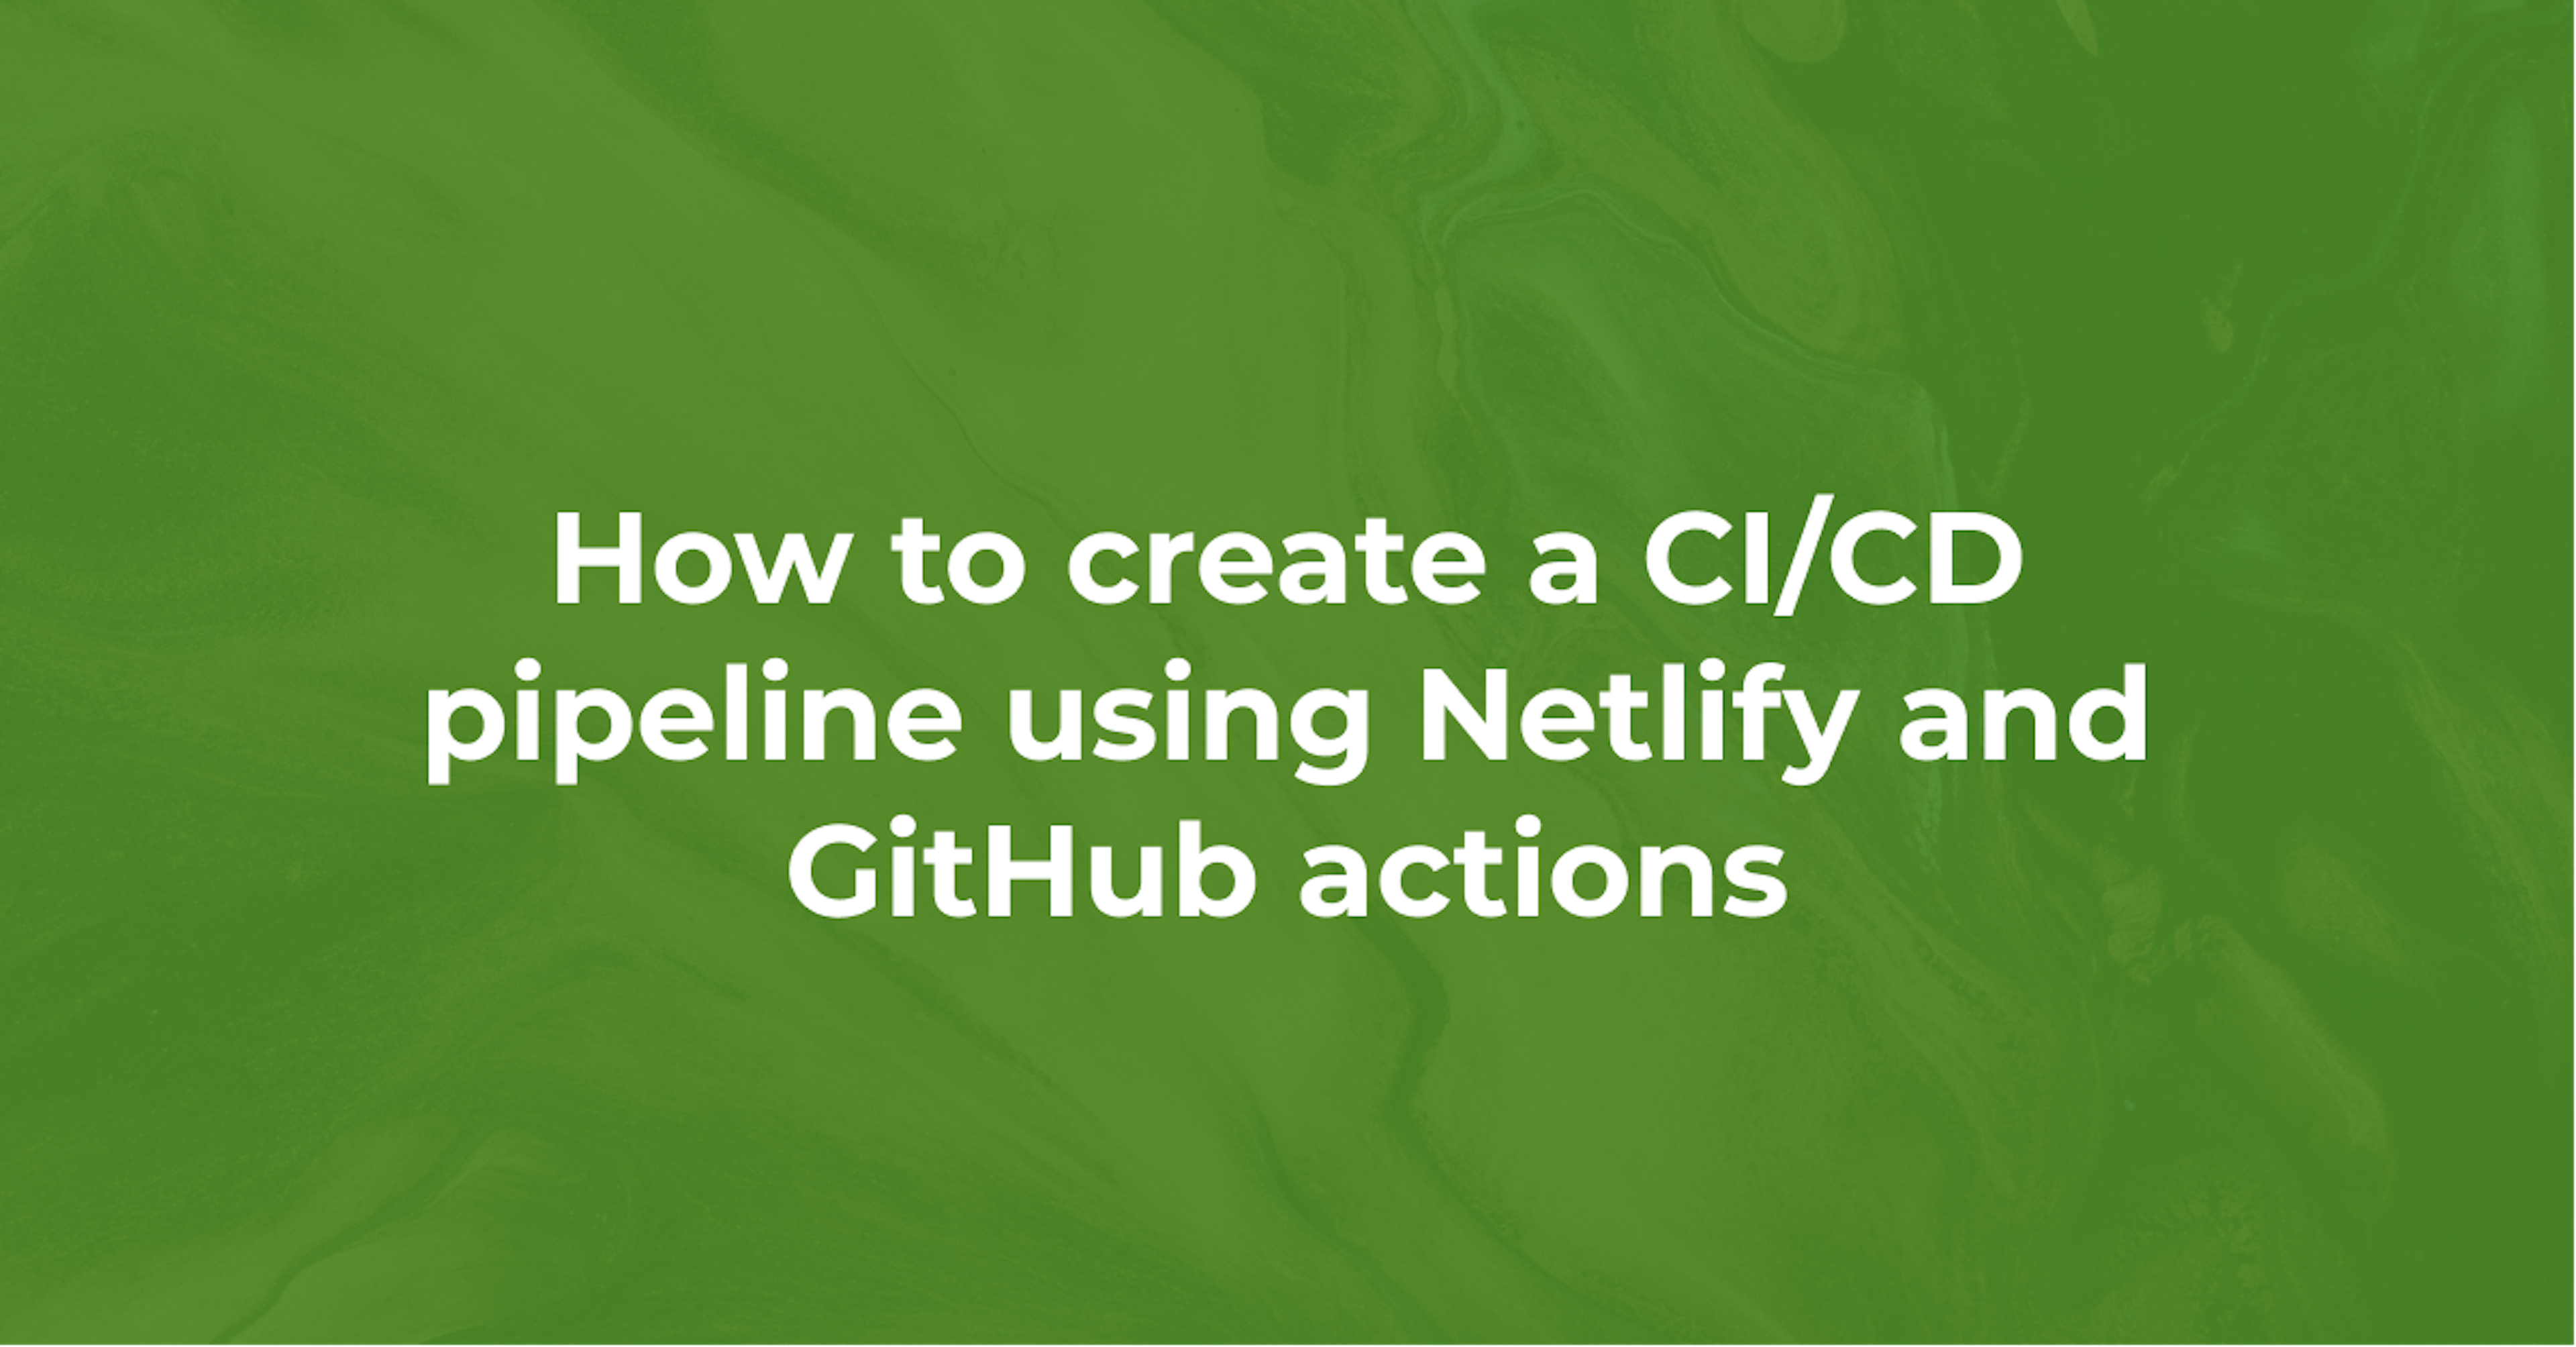 How to create a CI/CD pipeline using Netlify and GitHub actions